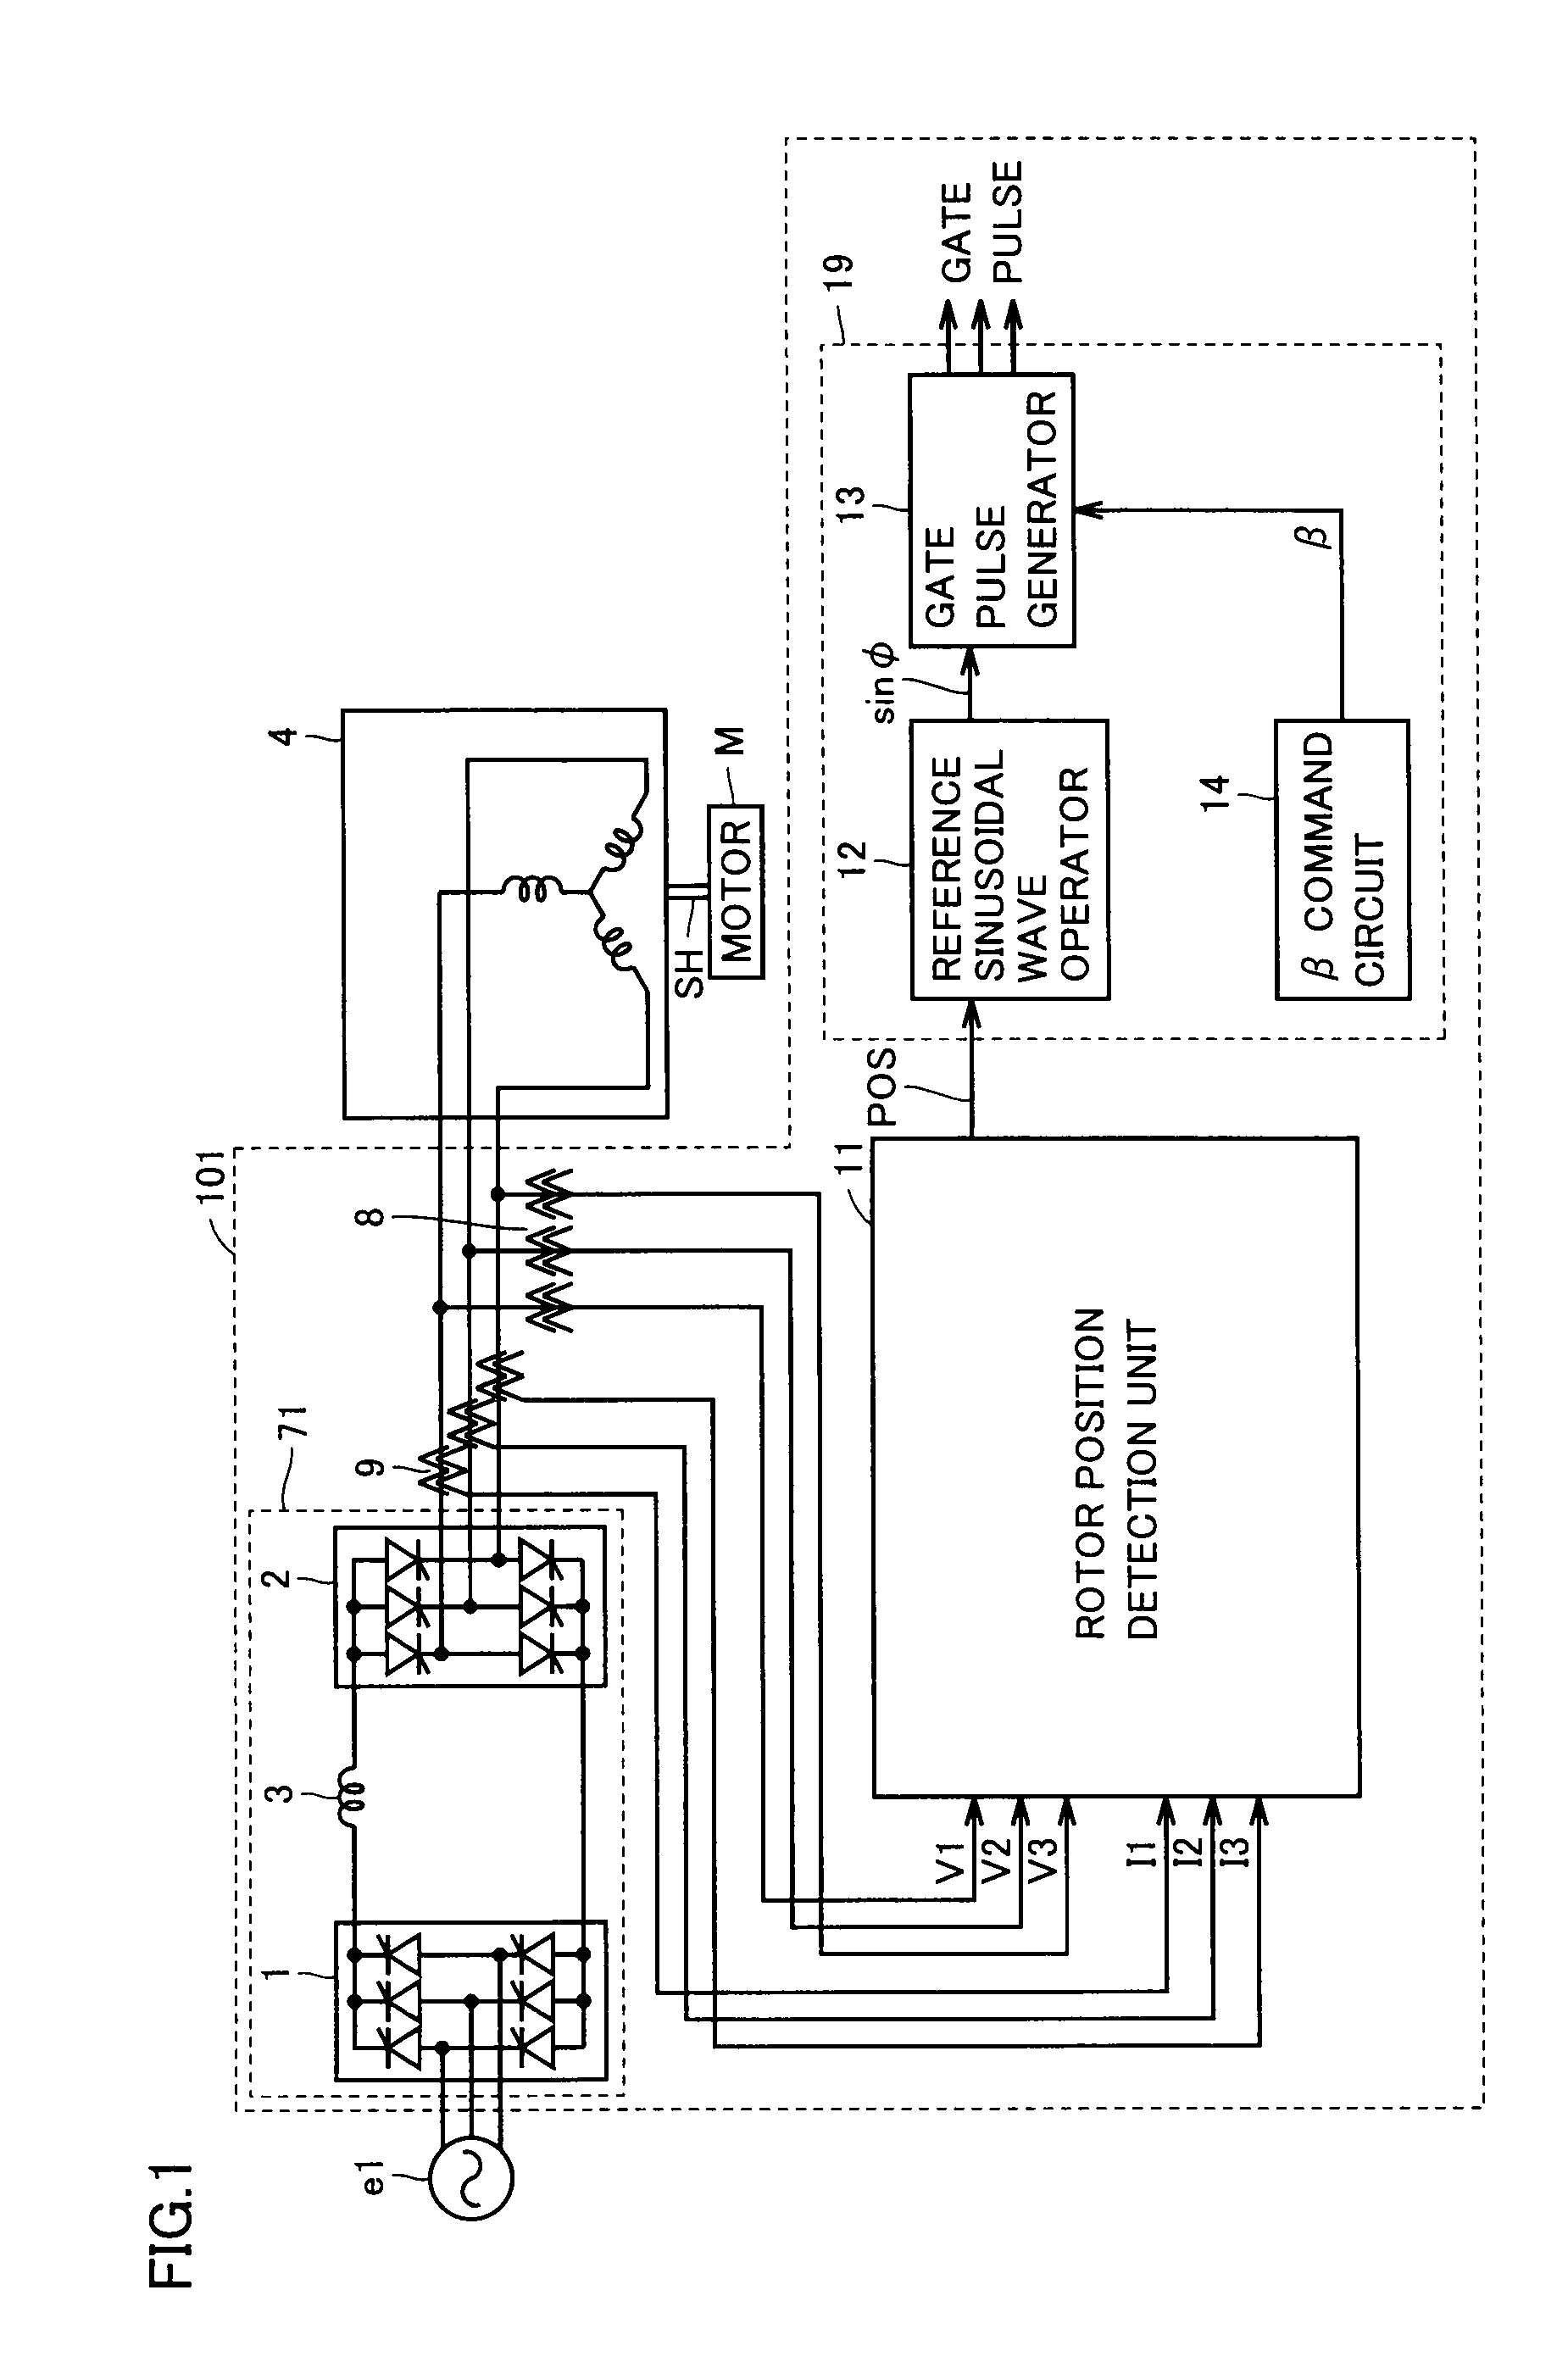 Synchronous machine starting device